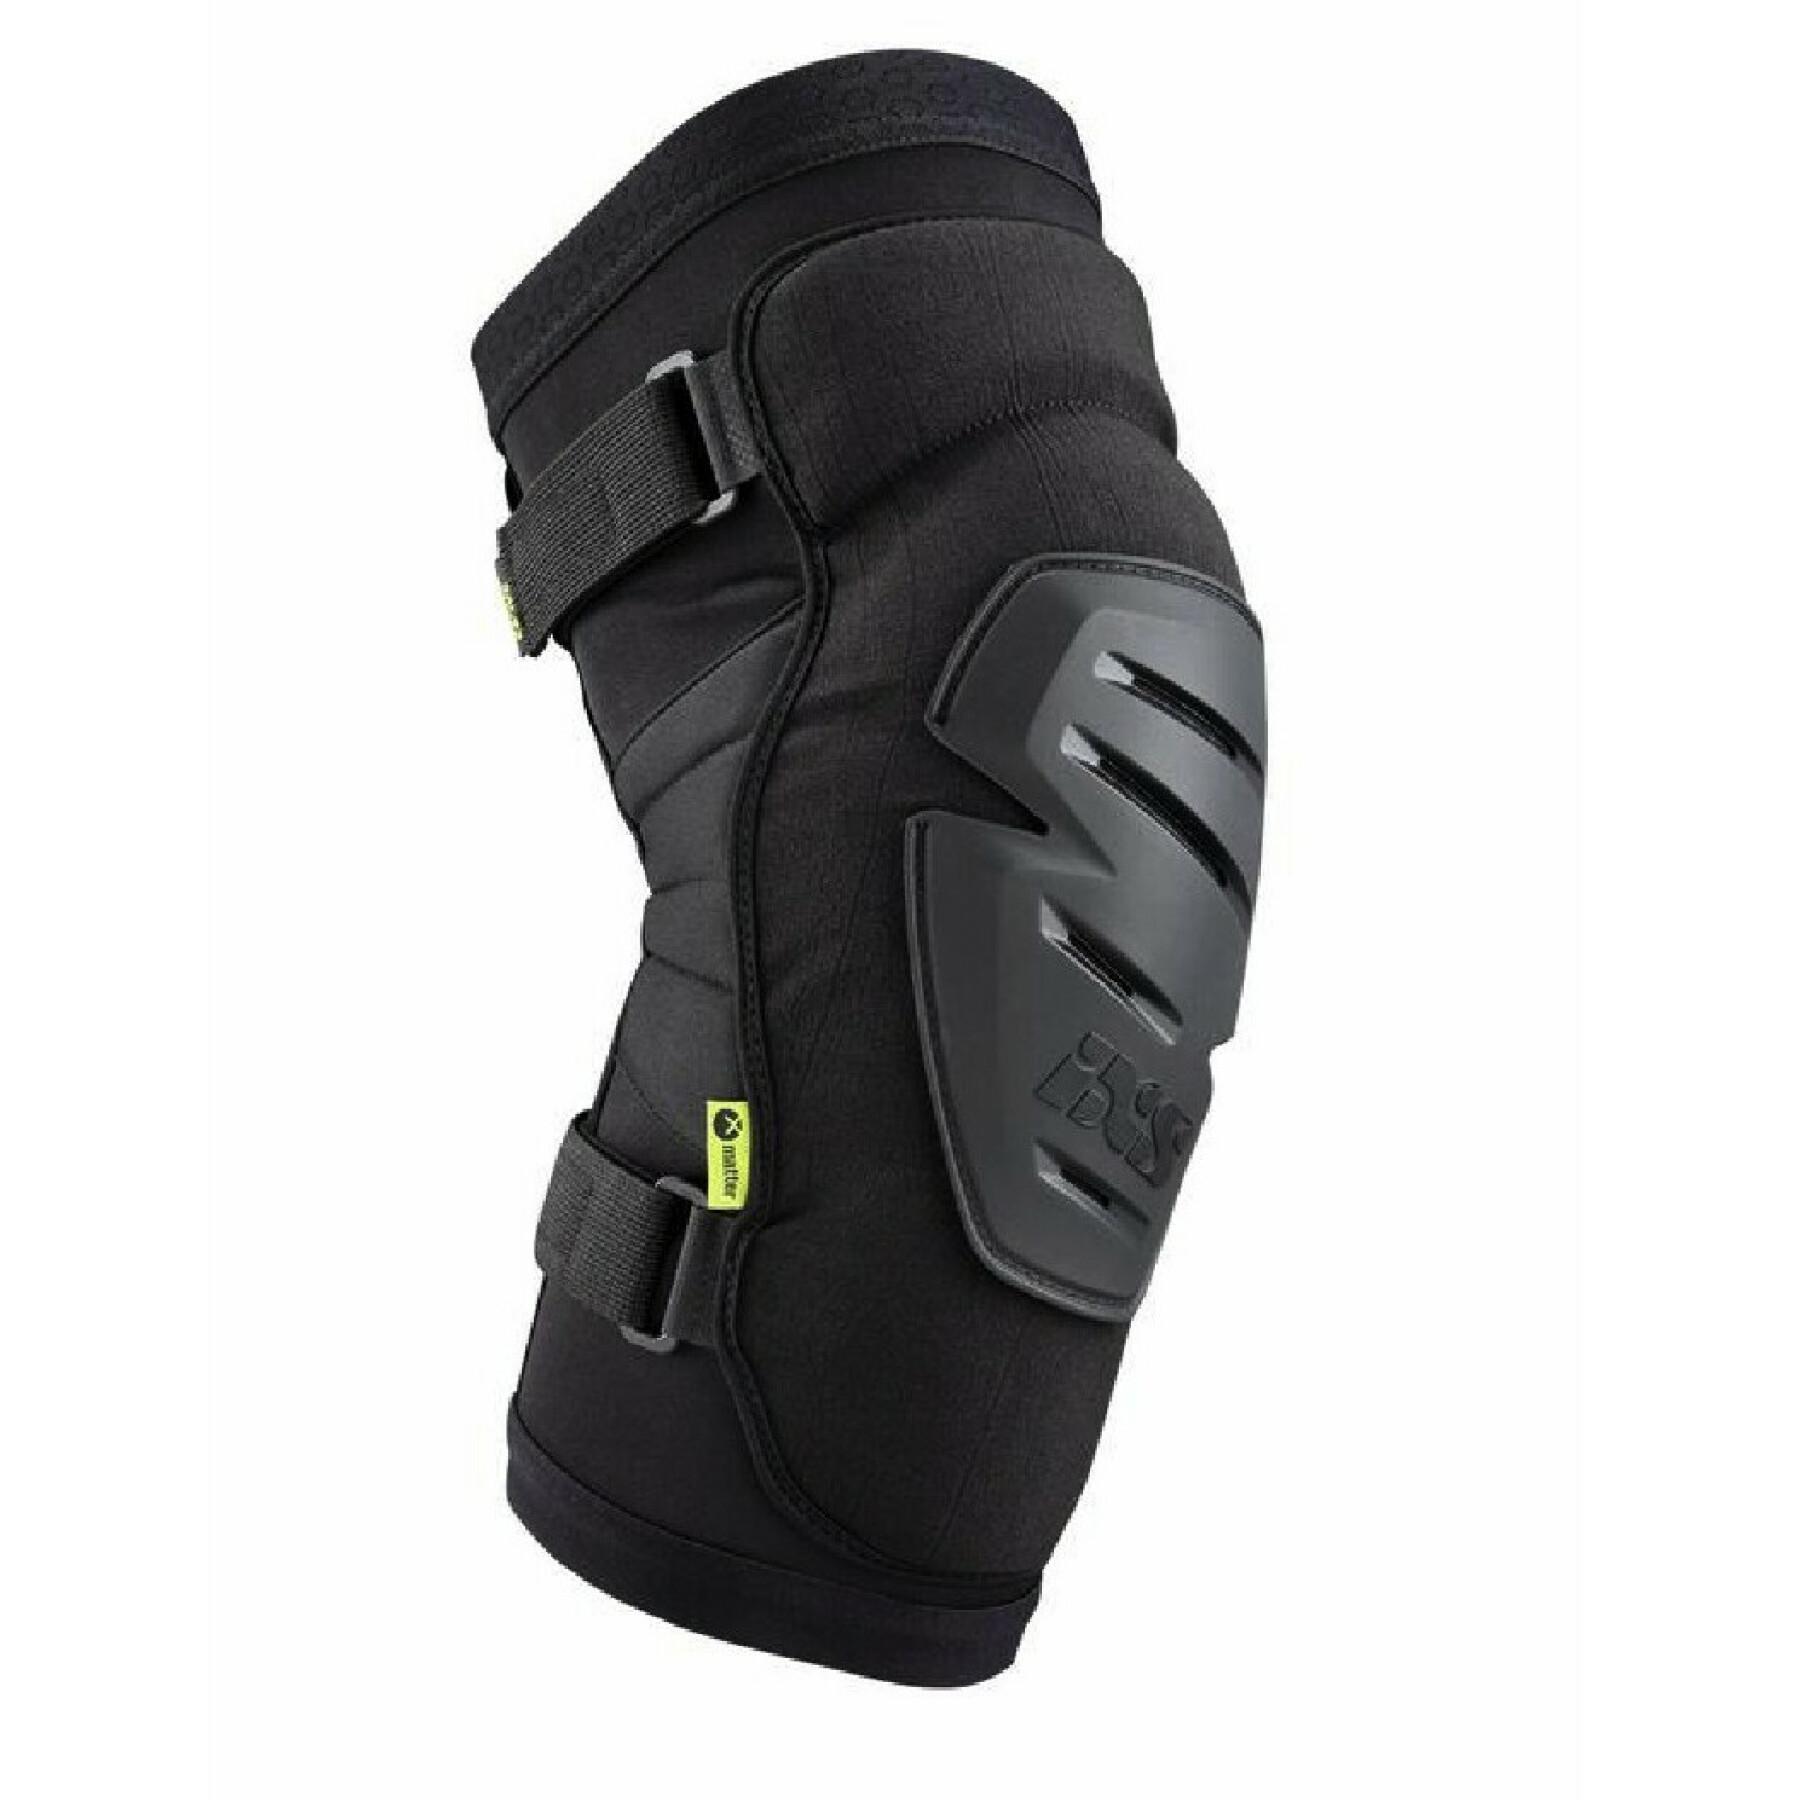 Knee protection for bicycles IXS Carve Race